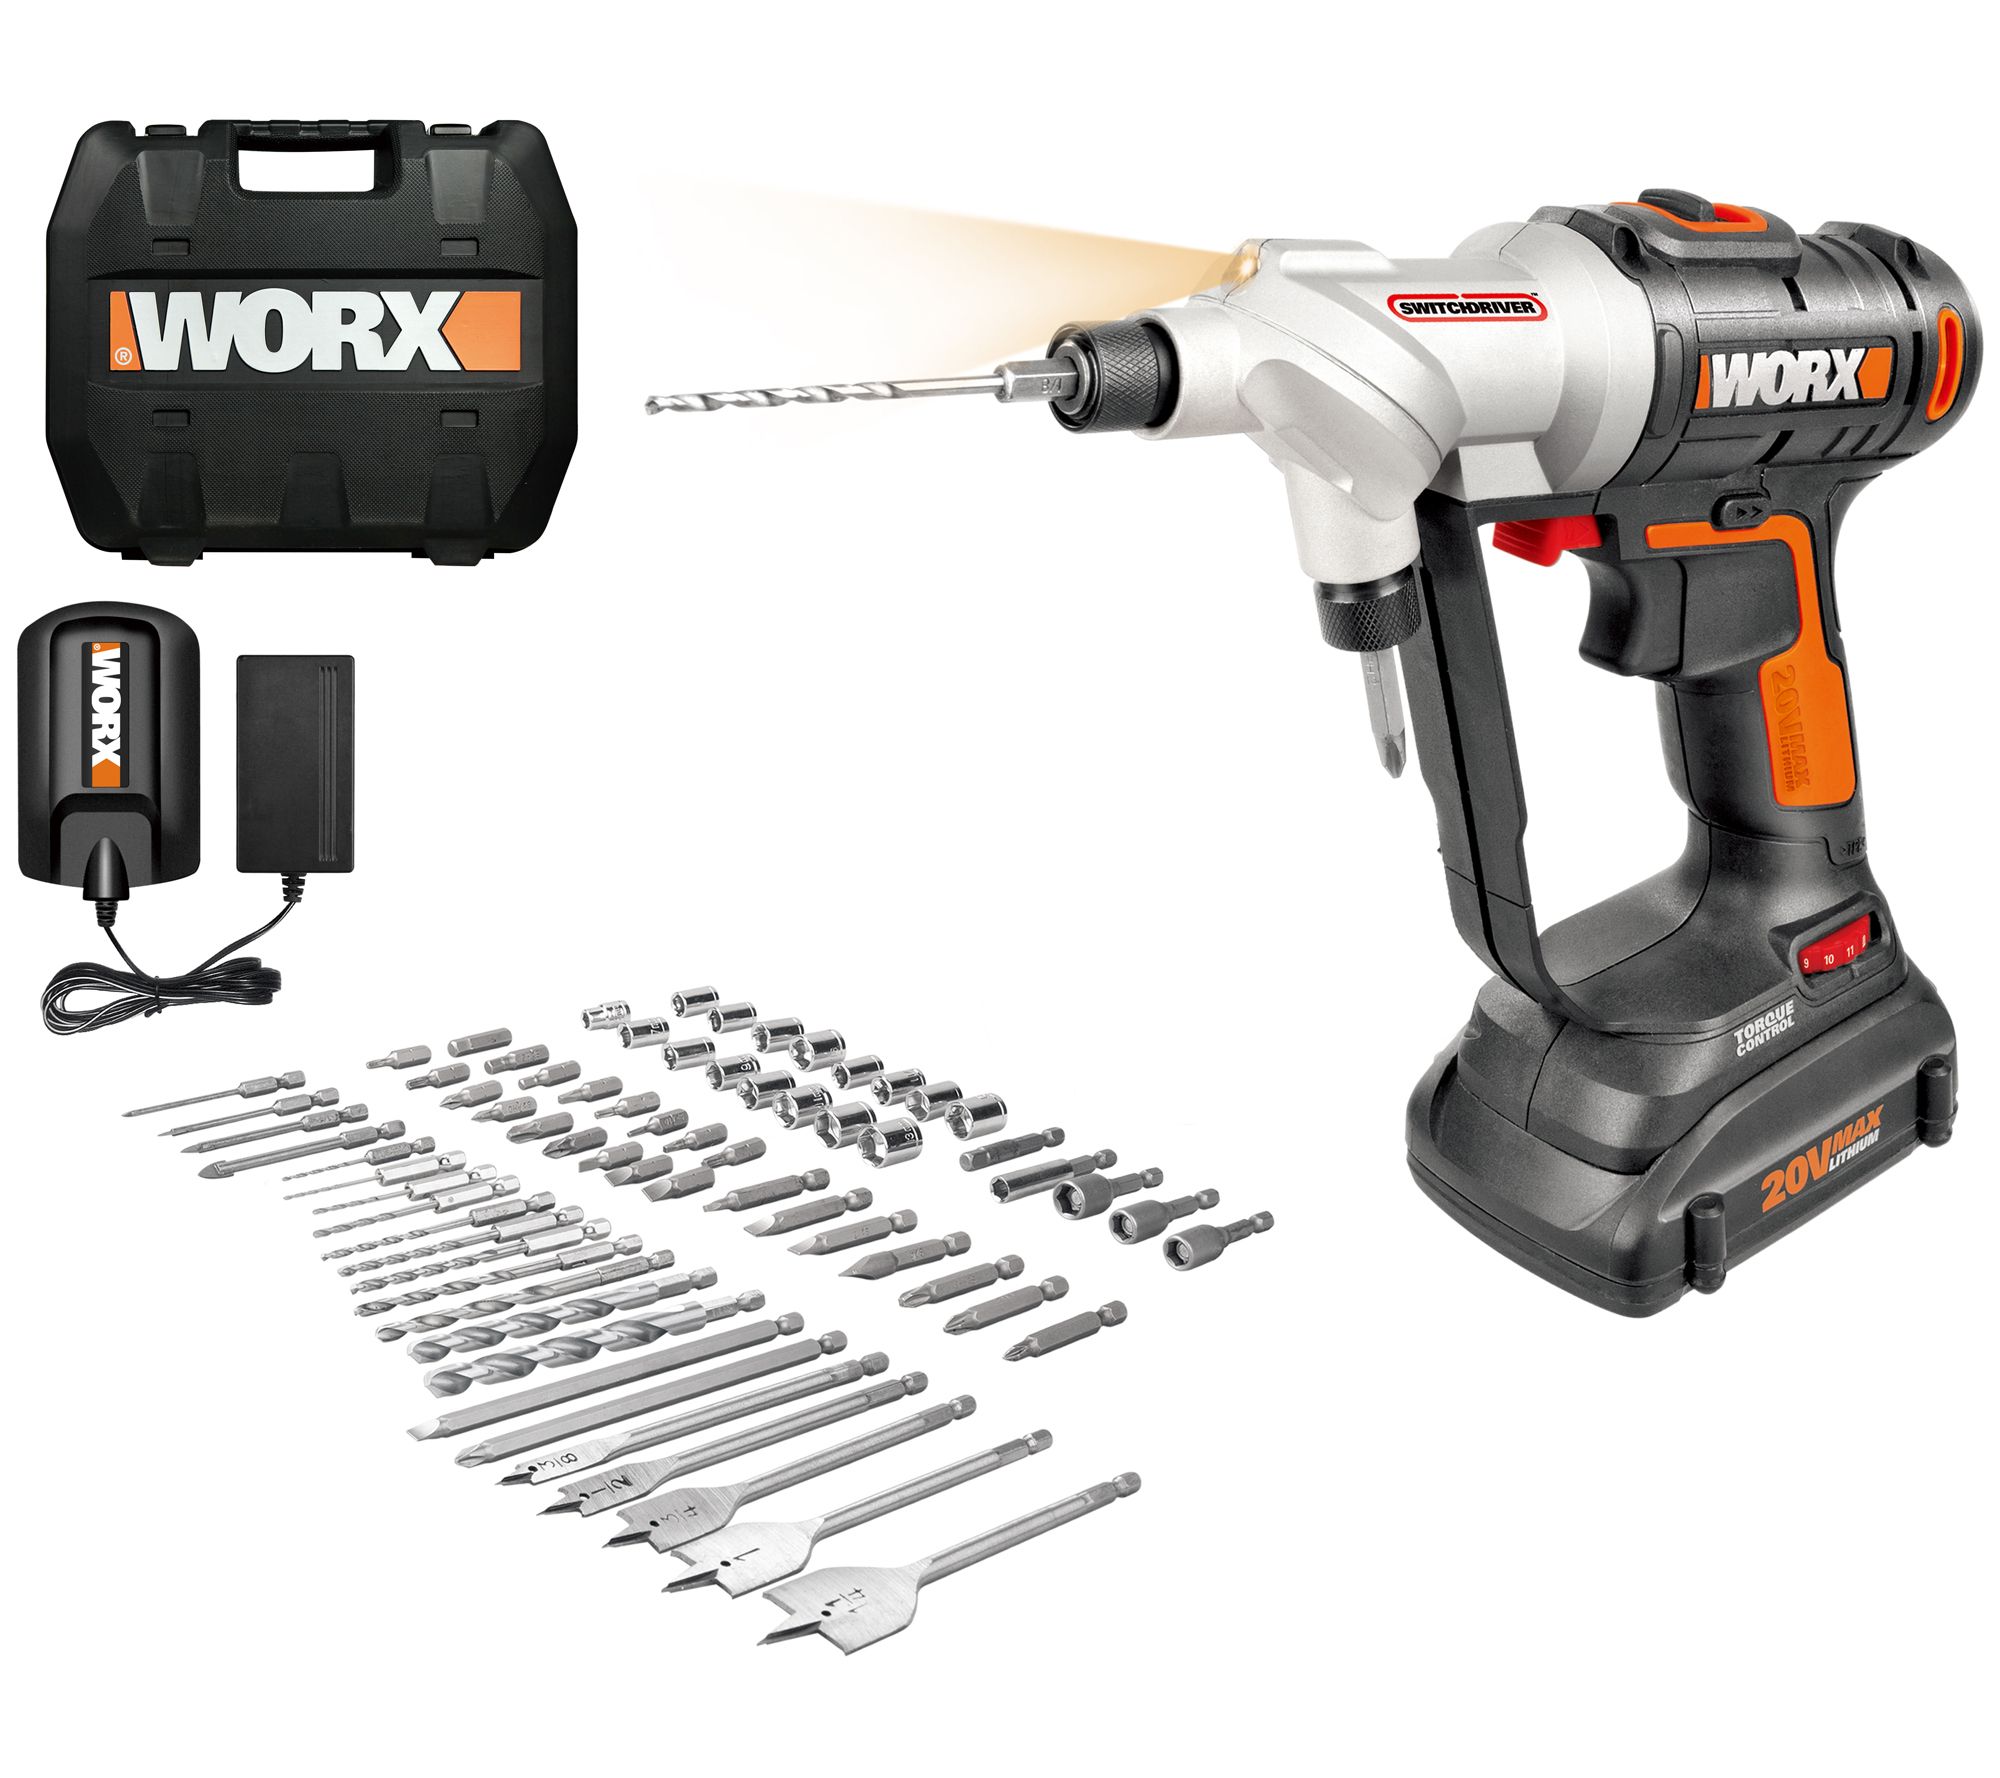 WORX Cordless 20V Drill and Impact Driver Combo Kit with Carry Case - tools  - by owner - sale - craigslist